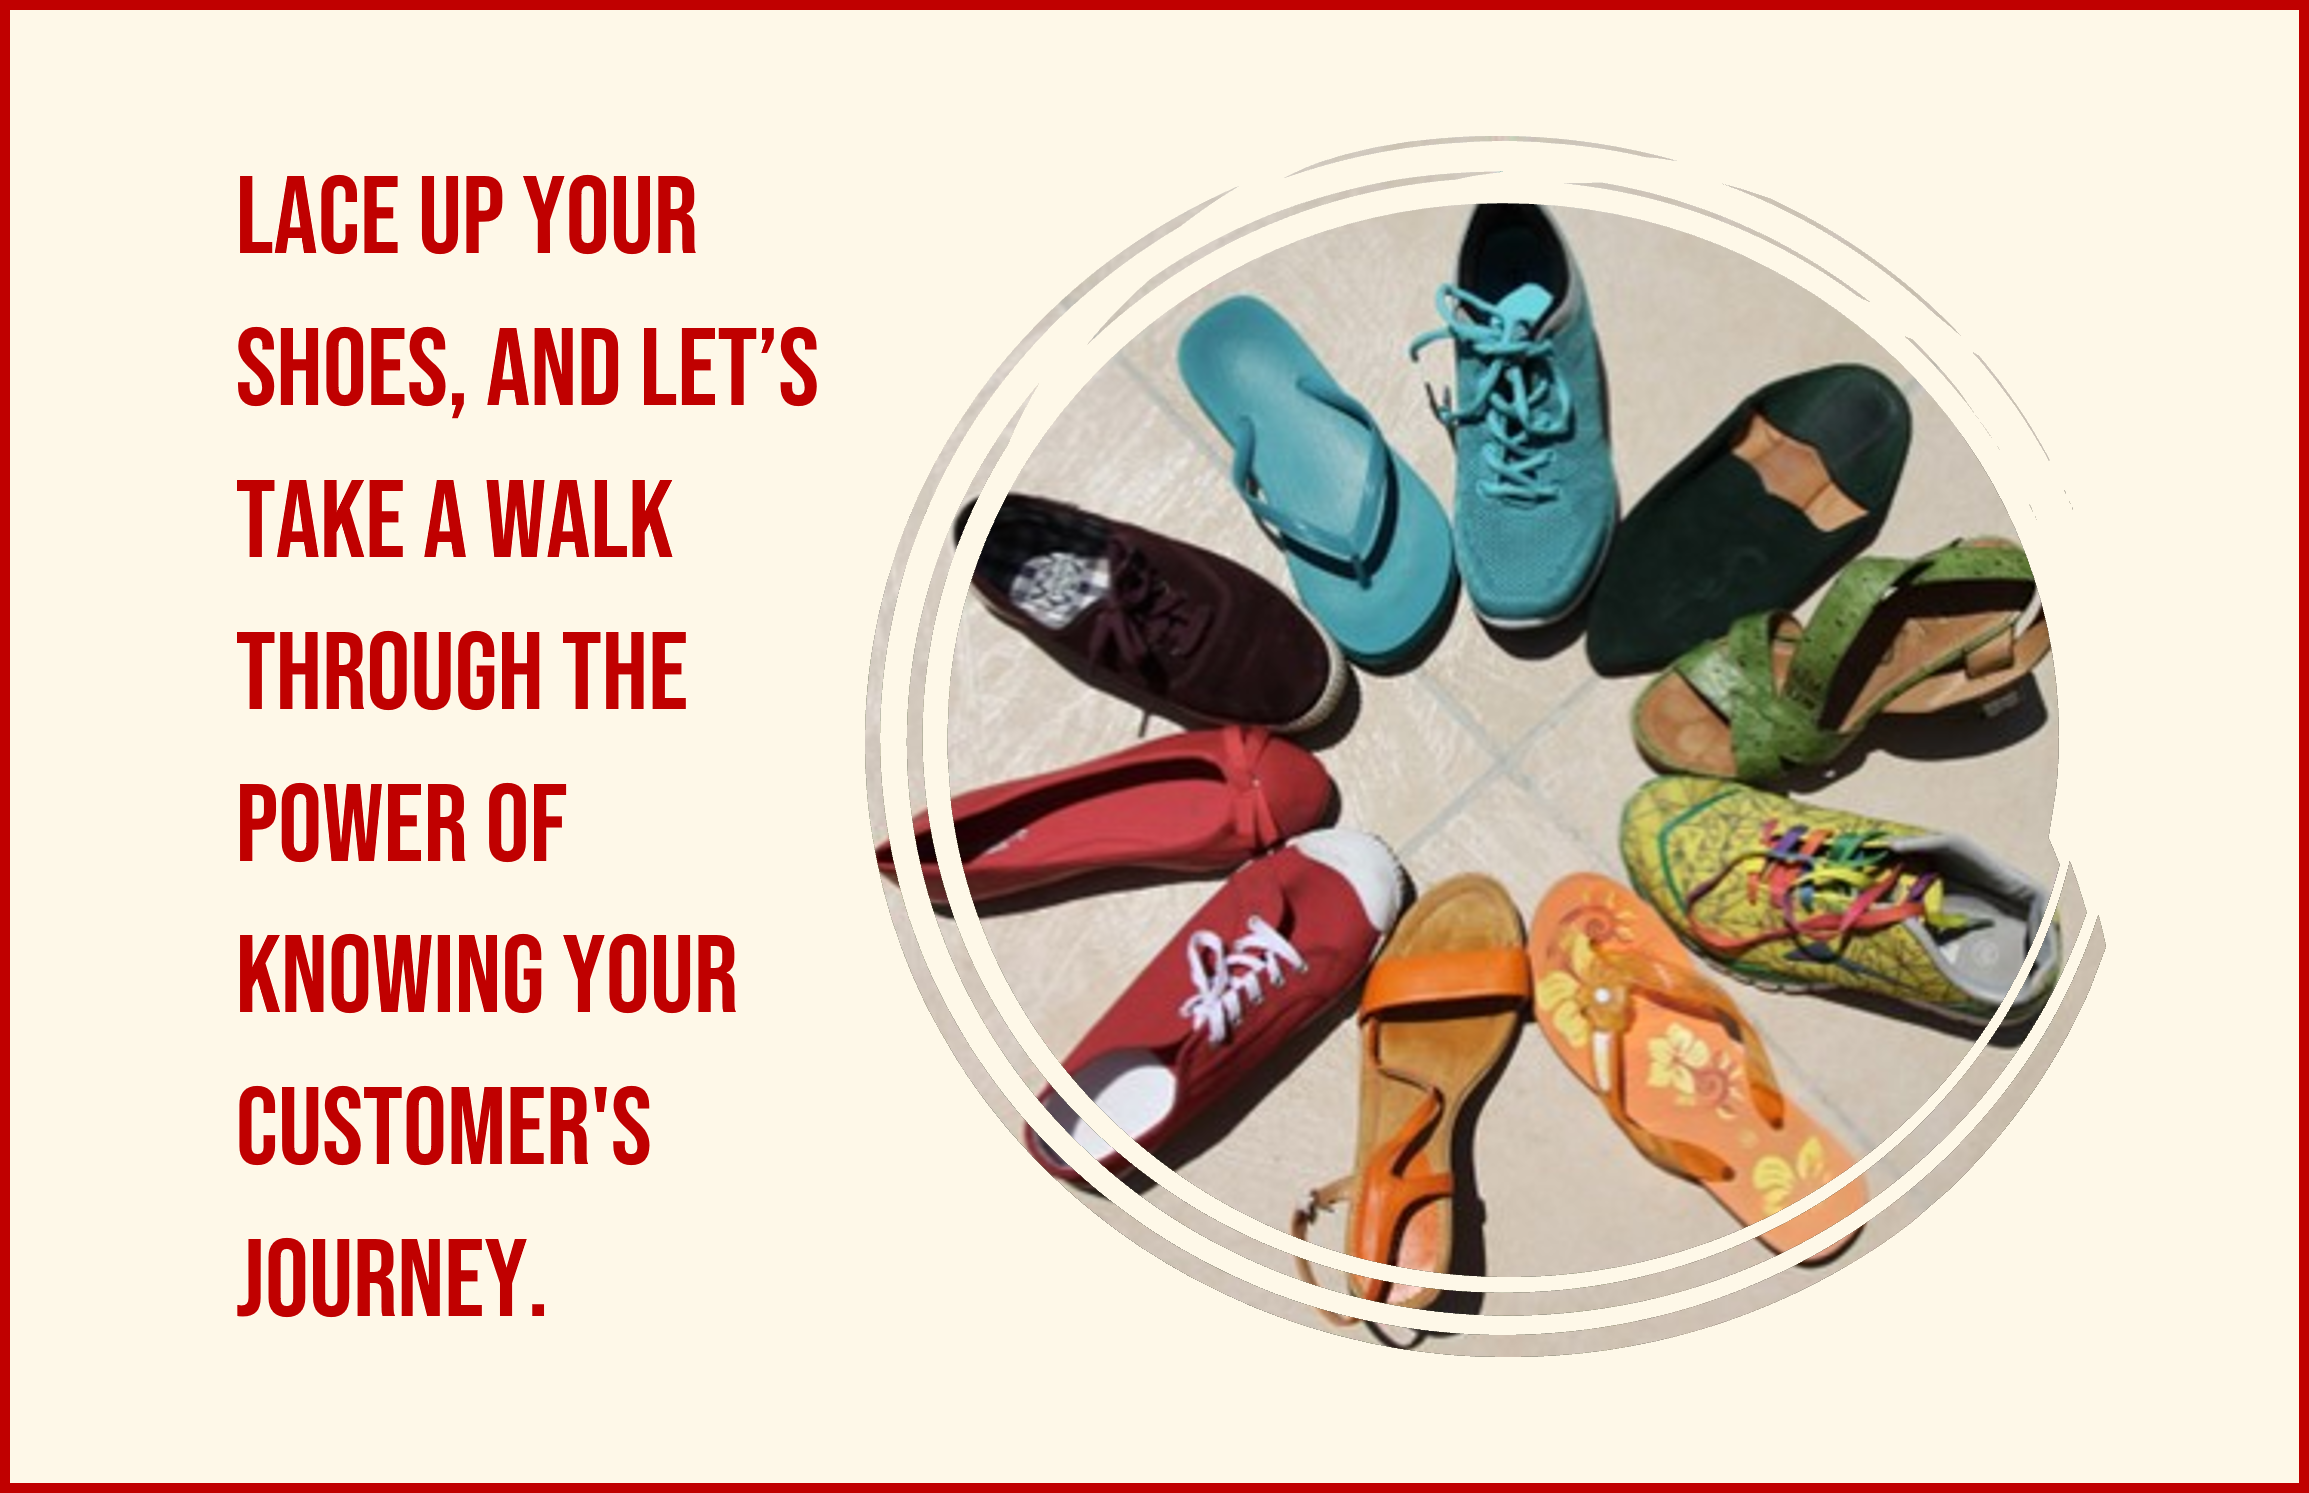 Lace up your shoes and let's take a walk through the power of knowing your customer's journey